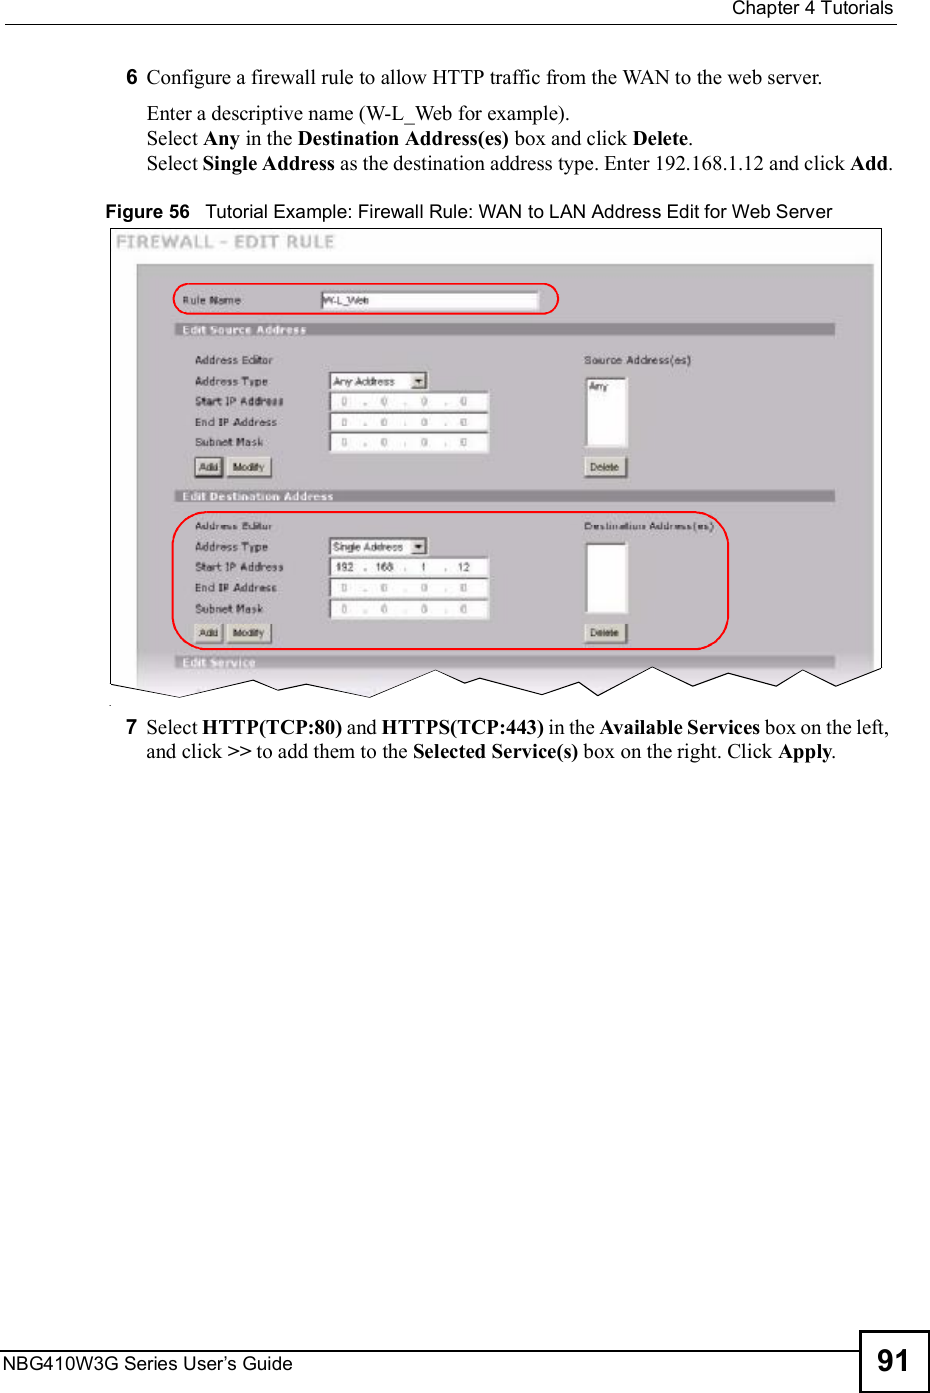  Chapter 4TutorialsNBG410W3G Series User s Guide 916Configure a firewall rule to allow HTTP traffic from the WAN to the web server.Enter a descriptive name (W-L_Web for example). Select Any in the Destination Address(es) box and click Delete.Select Single Address as the destination address type. Enter 192.168.1.12 and click Add.Figure 56   Tutorial Example: Firewall Rule: WAN to LAN Address Edit for Web Server 7Select HTTP(TCP:80) and HTTPS(TCP:443) in the Available Services box on the left, and click &gt;&gt; to add them to the Selected Service(s) box on the right. Click Apply.